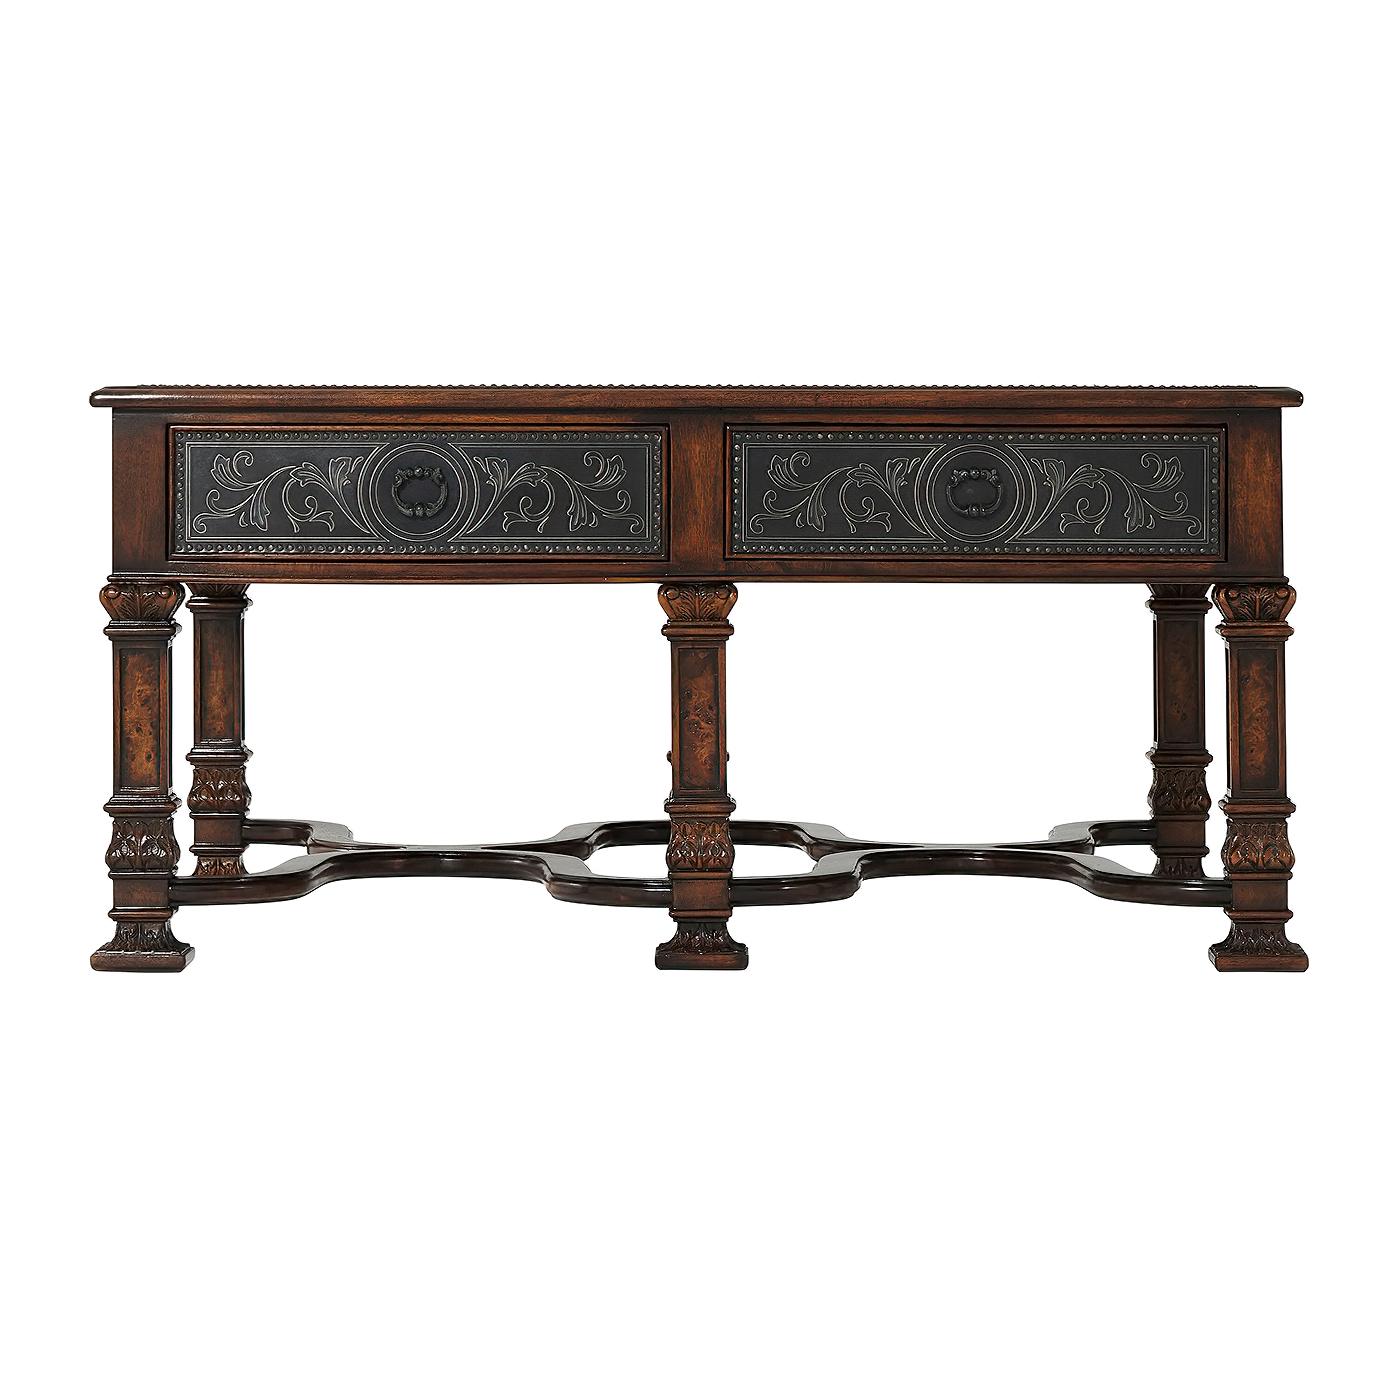 A French neoclassic style etched brass paneled cocktail table, the top and sides with floral decoration, the frieze fitted with two drawers to one side, on poplar burl veneer square paneled legs with carved capitals and bases joined by wavy 'X'